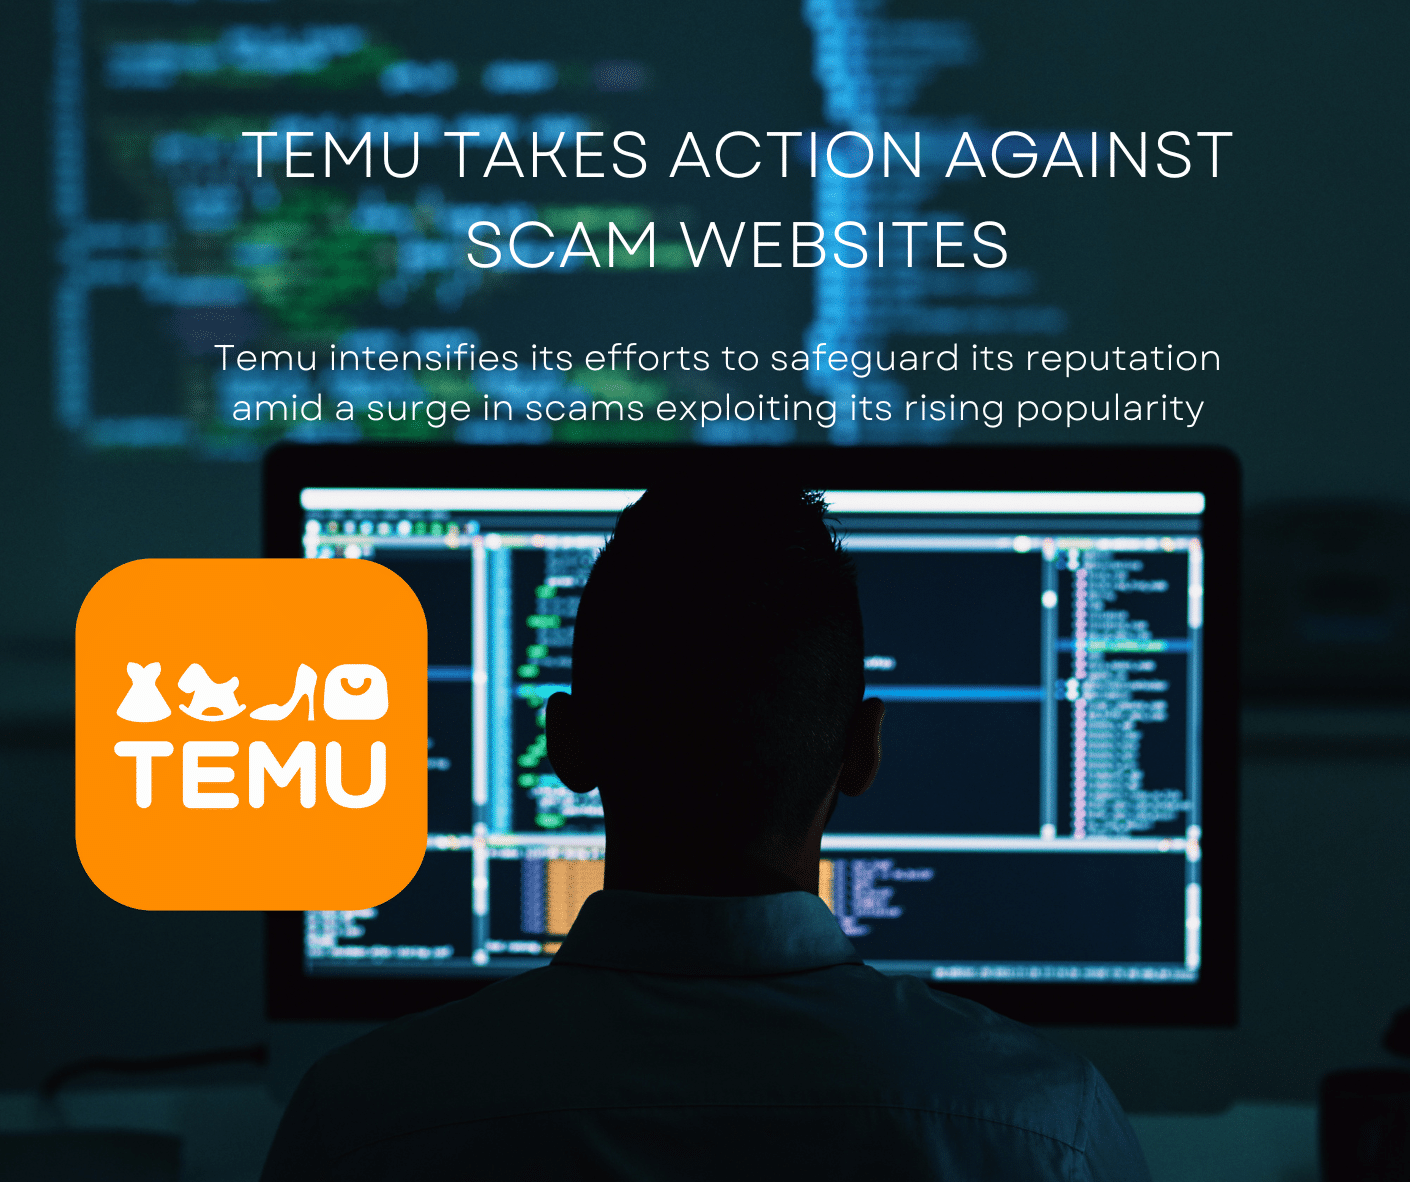 Temu Takes Action Against 20 Scam Websites